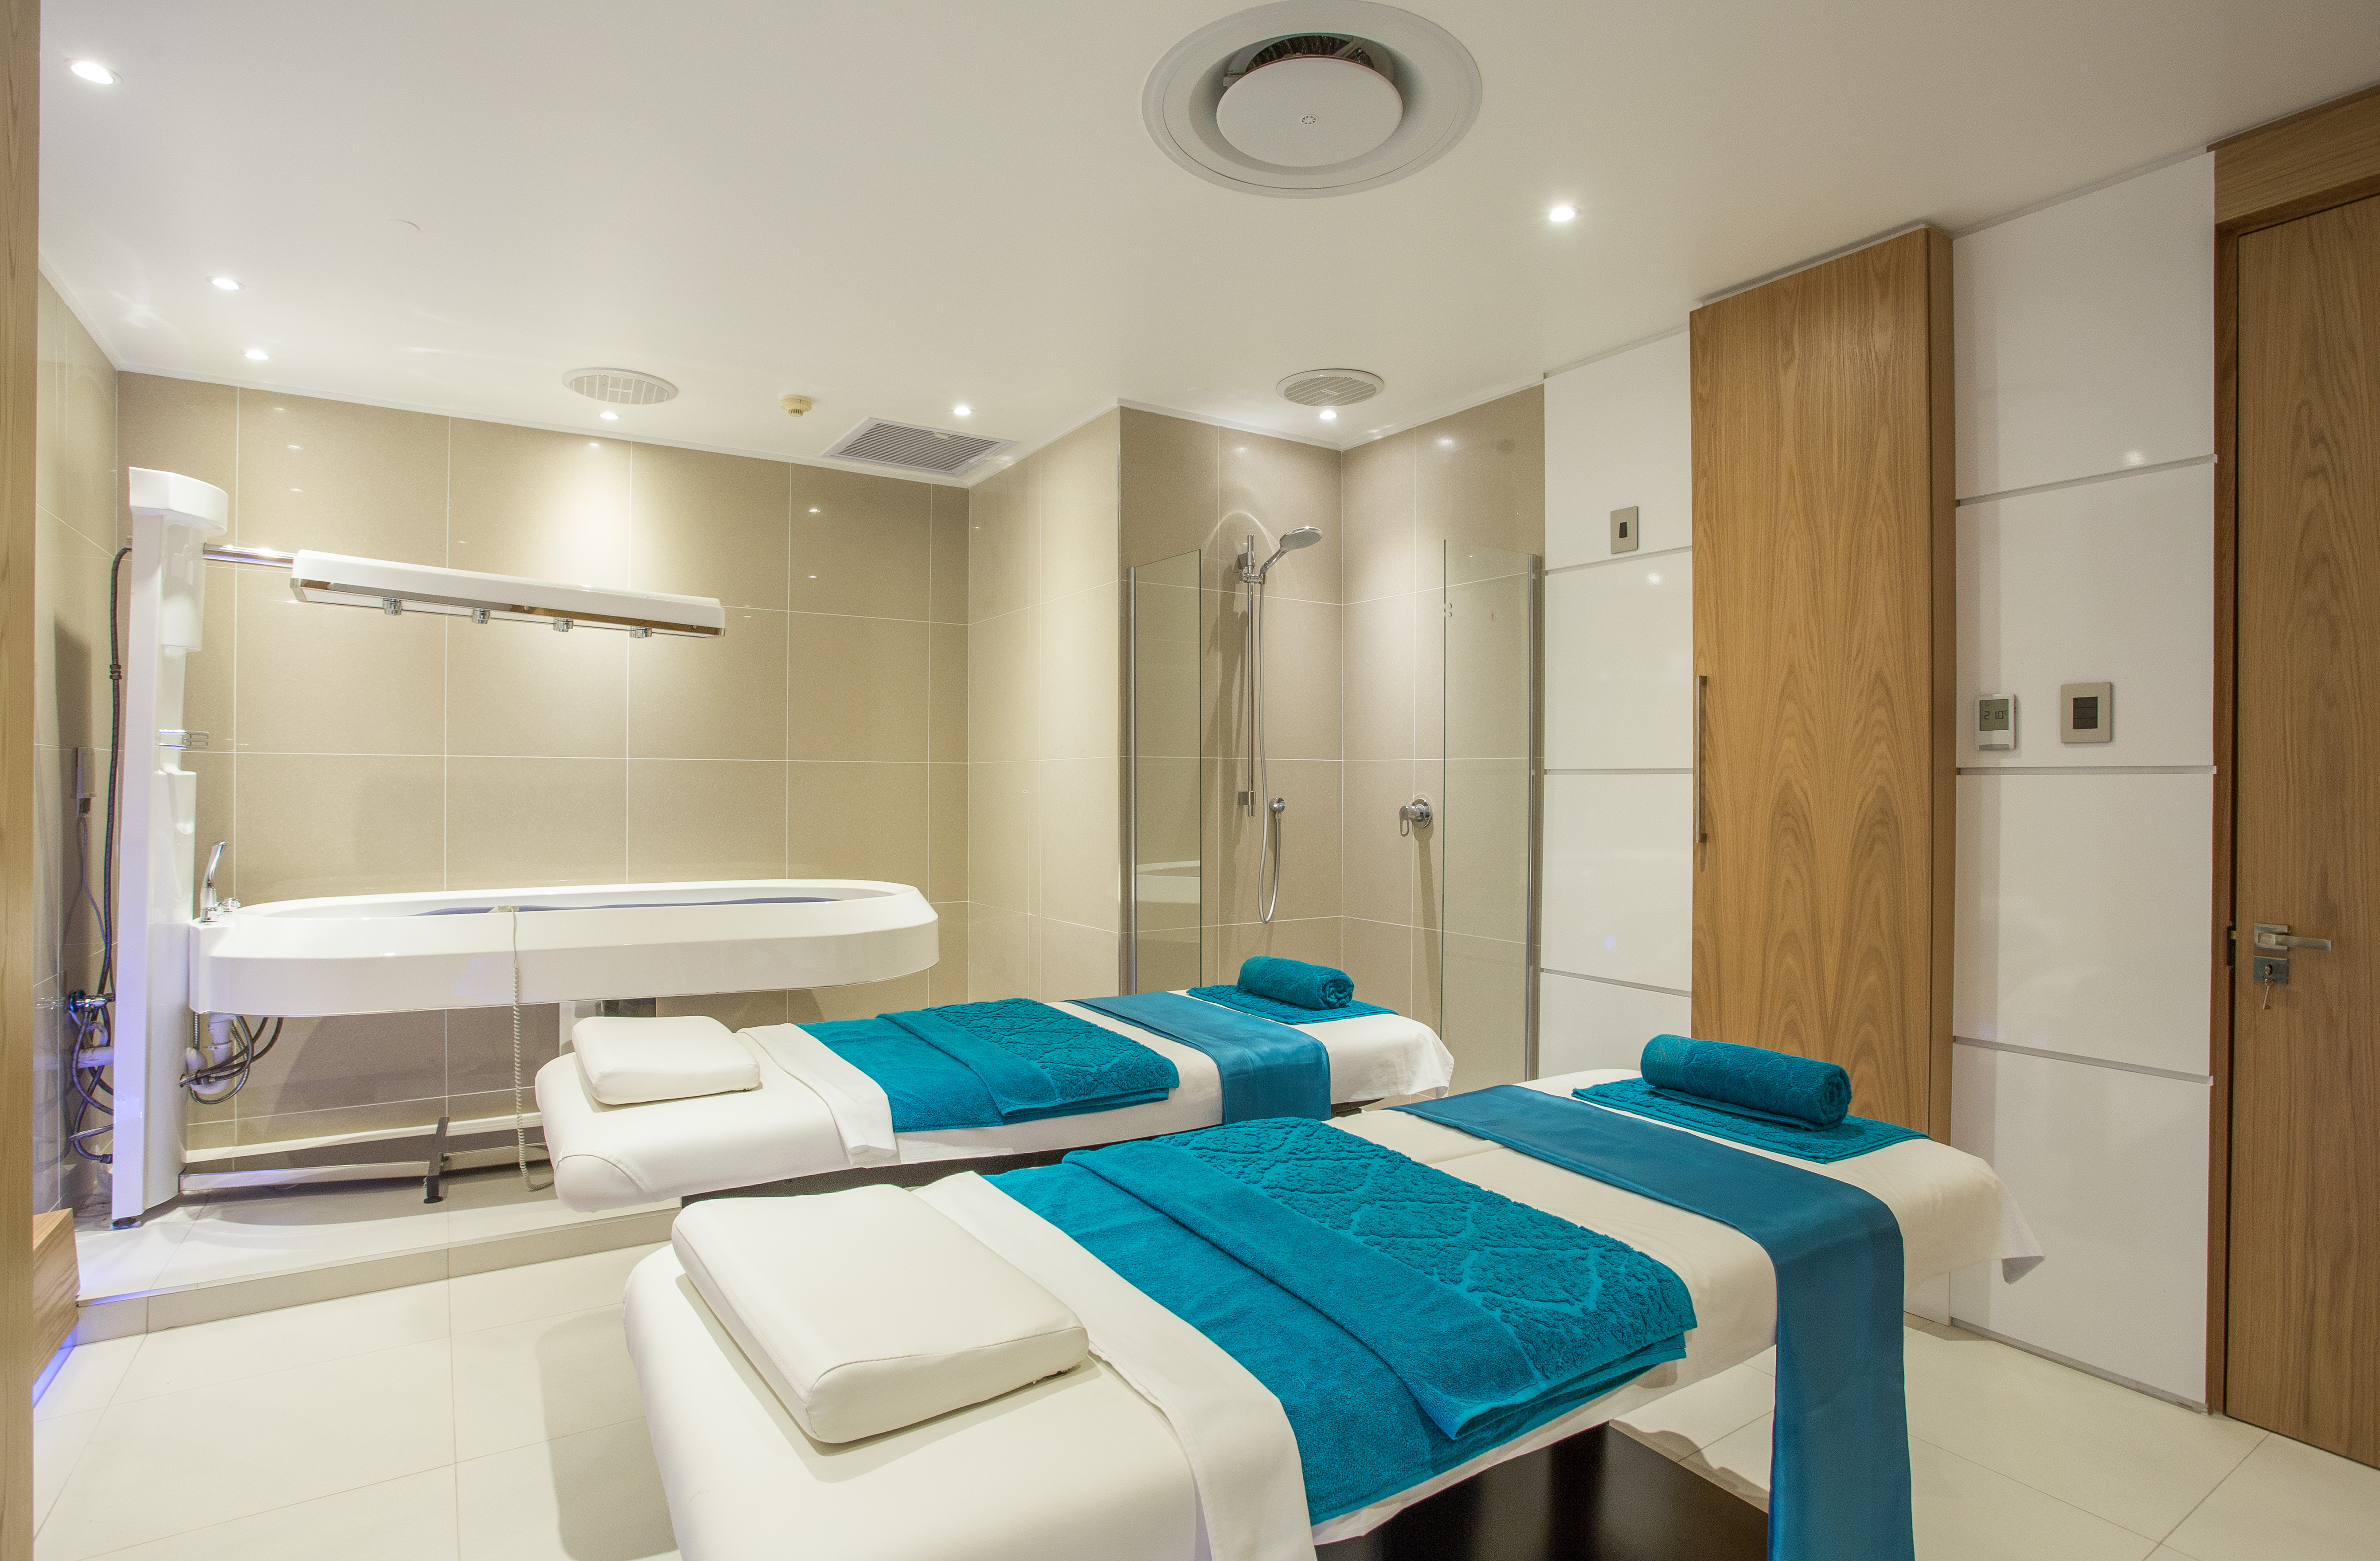 Massage Beds and Shower in Spa Room